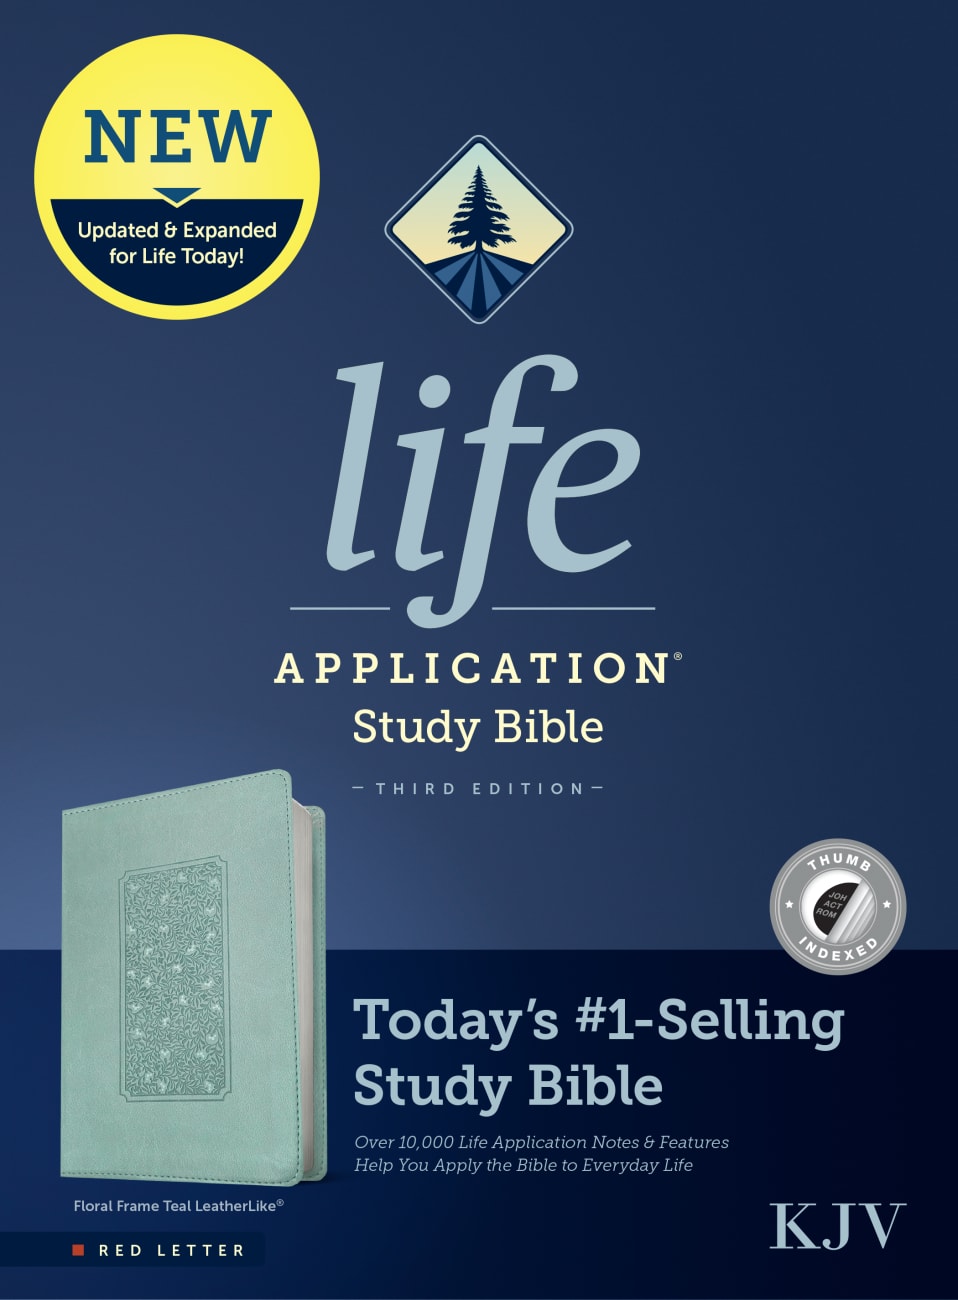 KJV Life Application Study Bible 3rd Edition Floral Frame Teal Indexed (Red Letter Edition) Imitation Leather